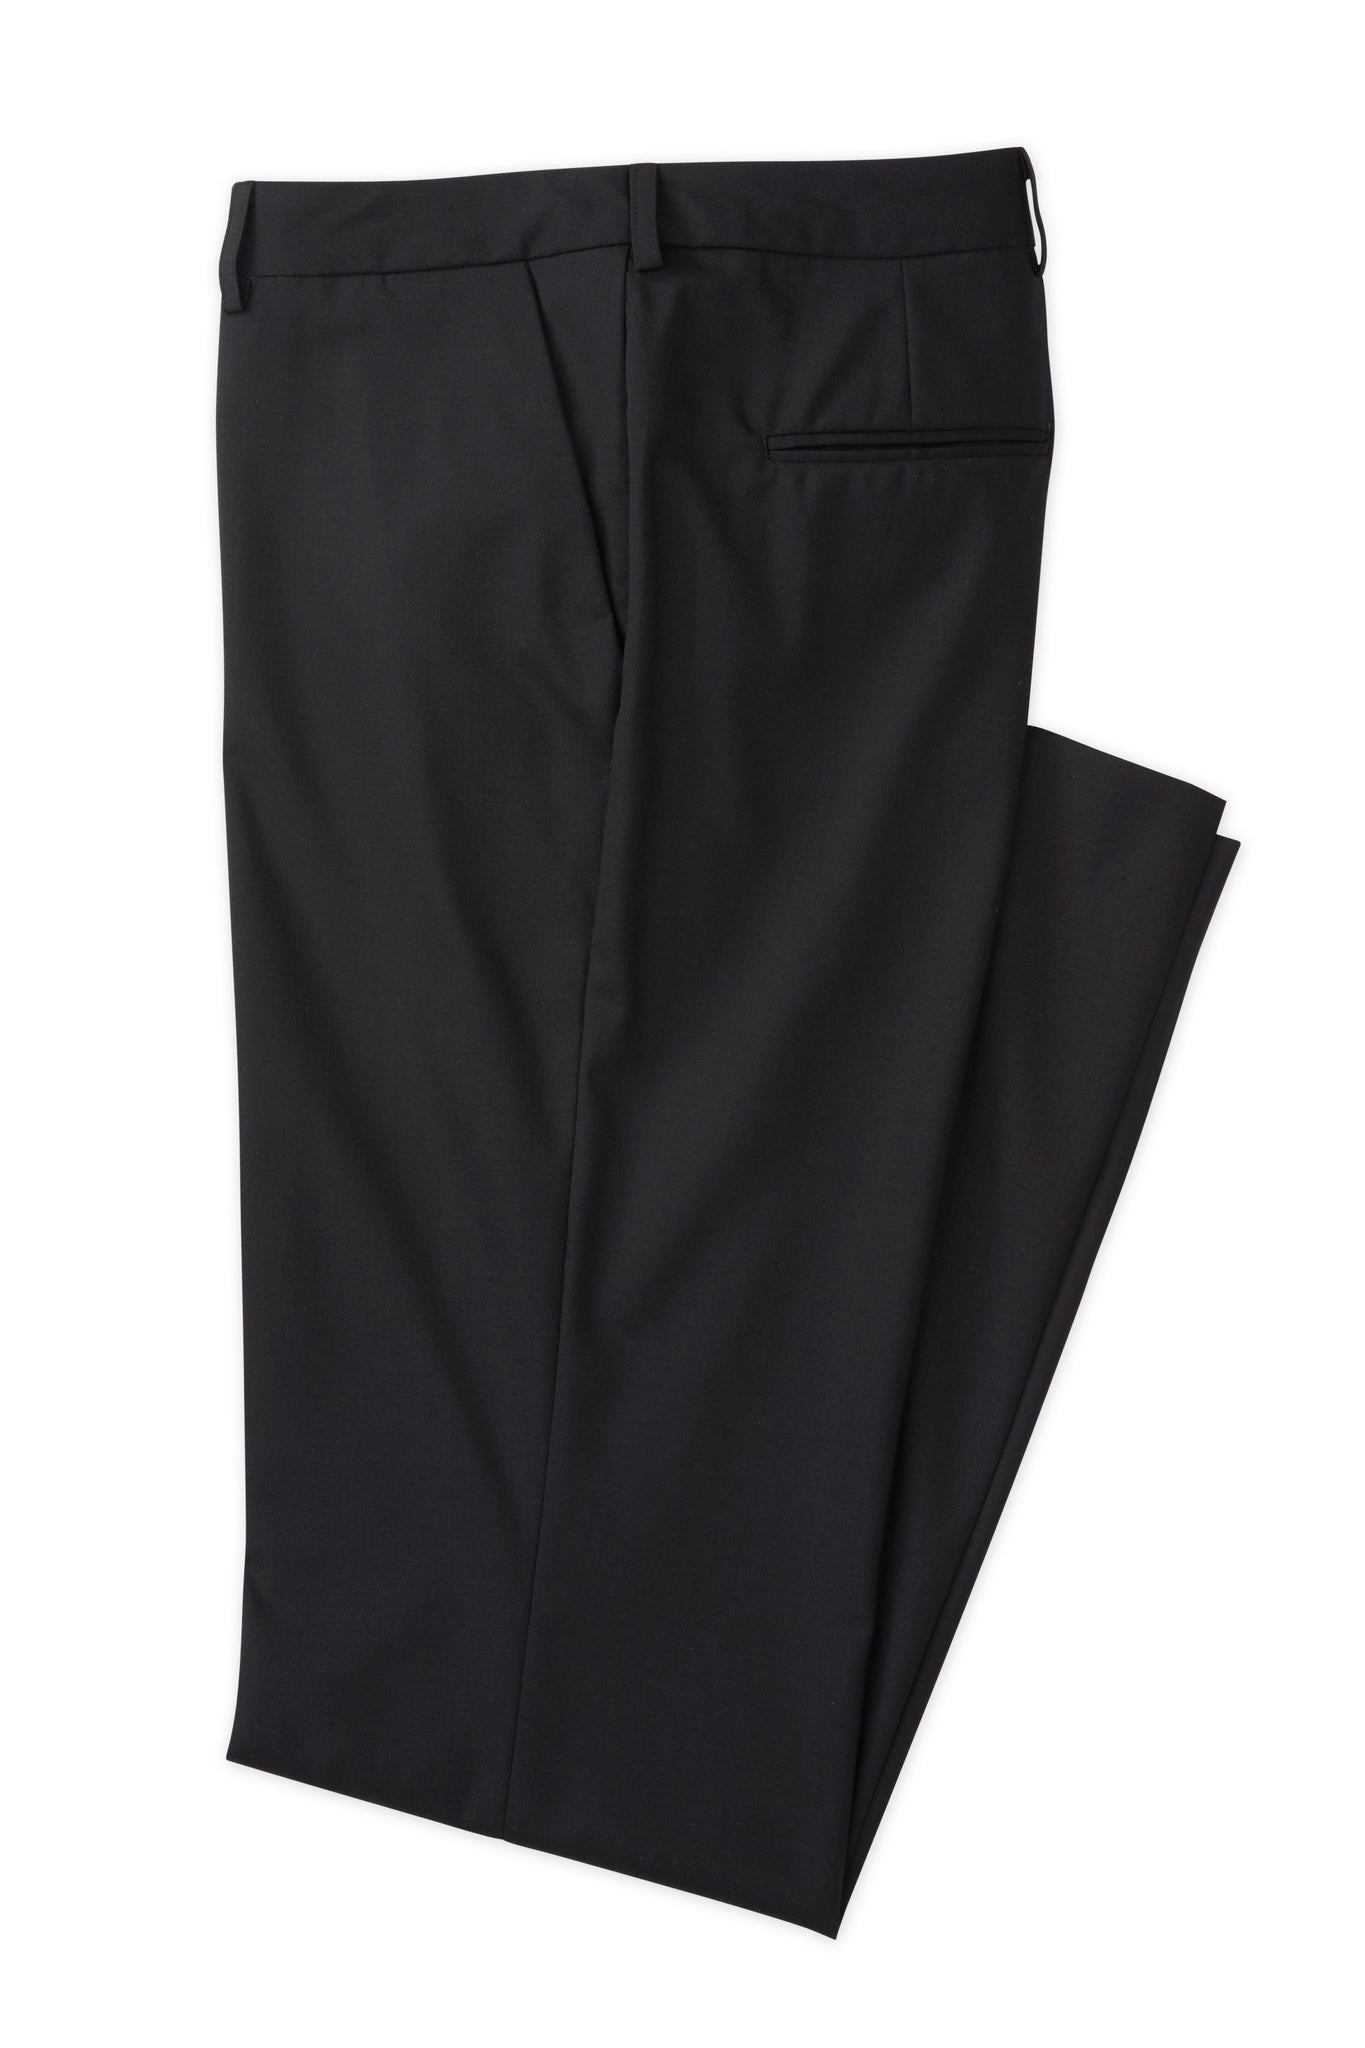 Monochromatic Work Outfit: Petite Black Wide Leg Trouser Pants | Black wide  leg trousers outfit, Wide leg pants outfit work, Wide leg trousers outfit